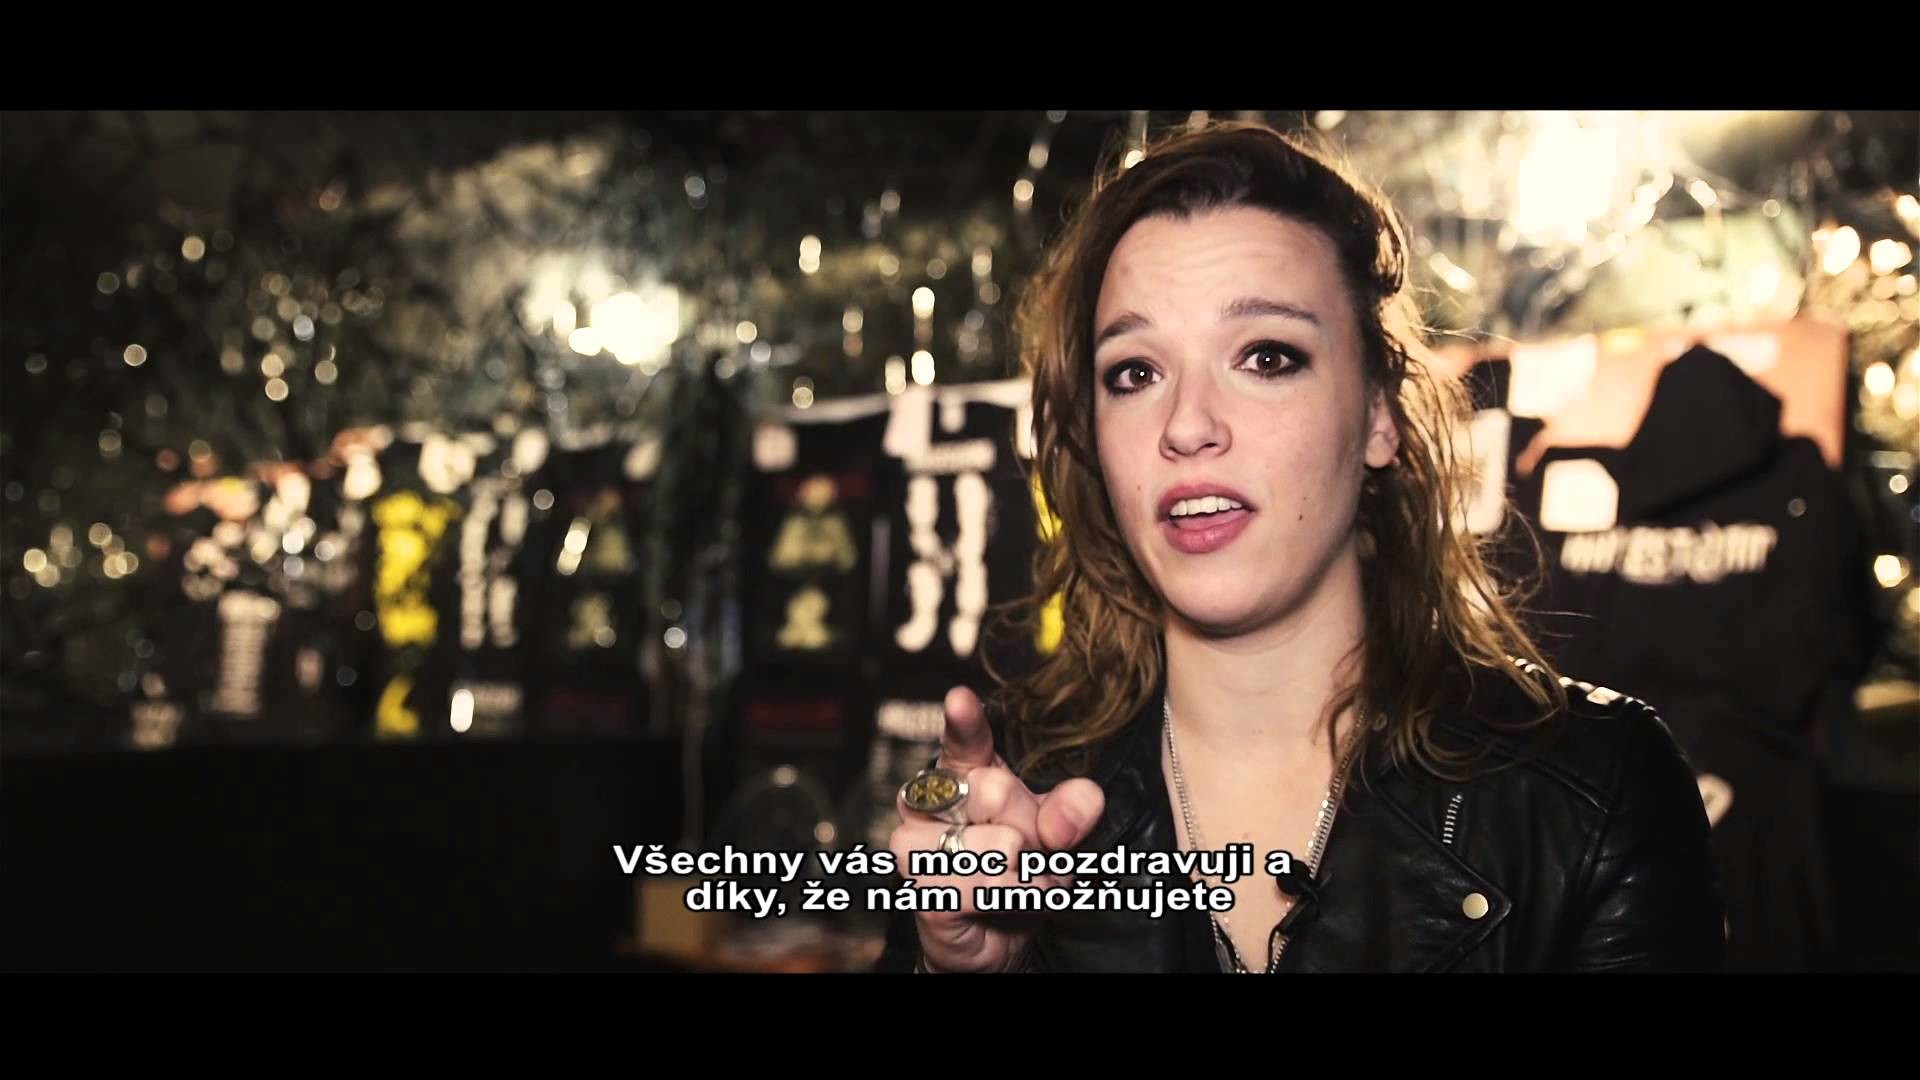 1920x1080 Greeting by Lzzy Hale from HALESTORM